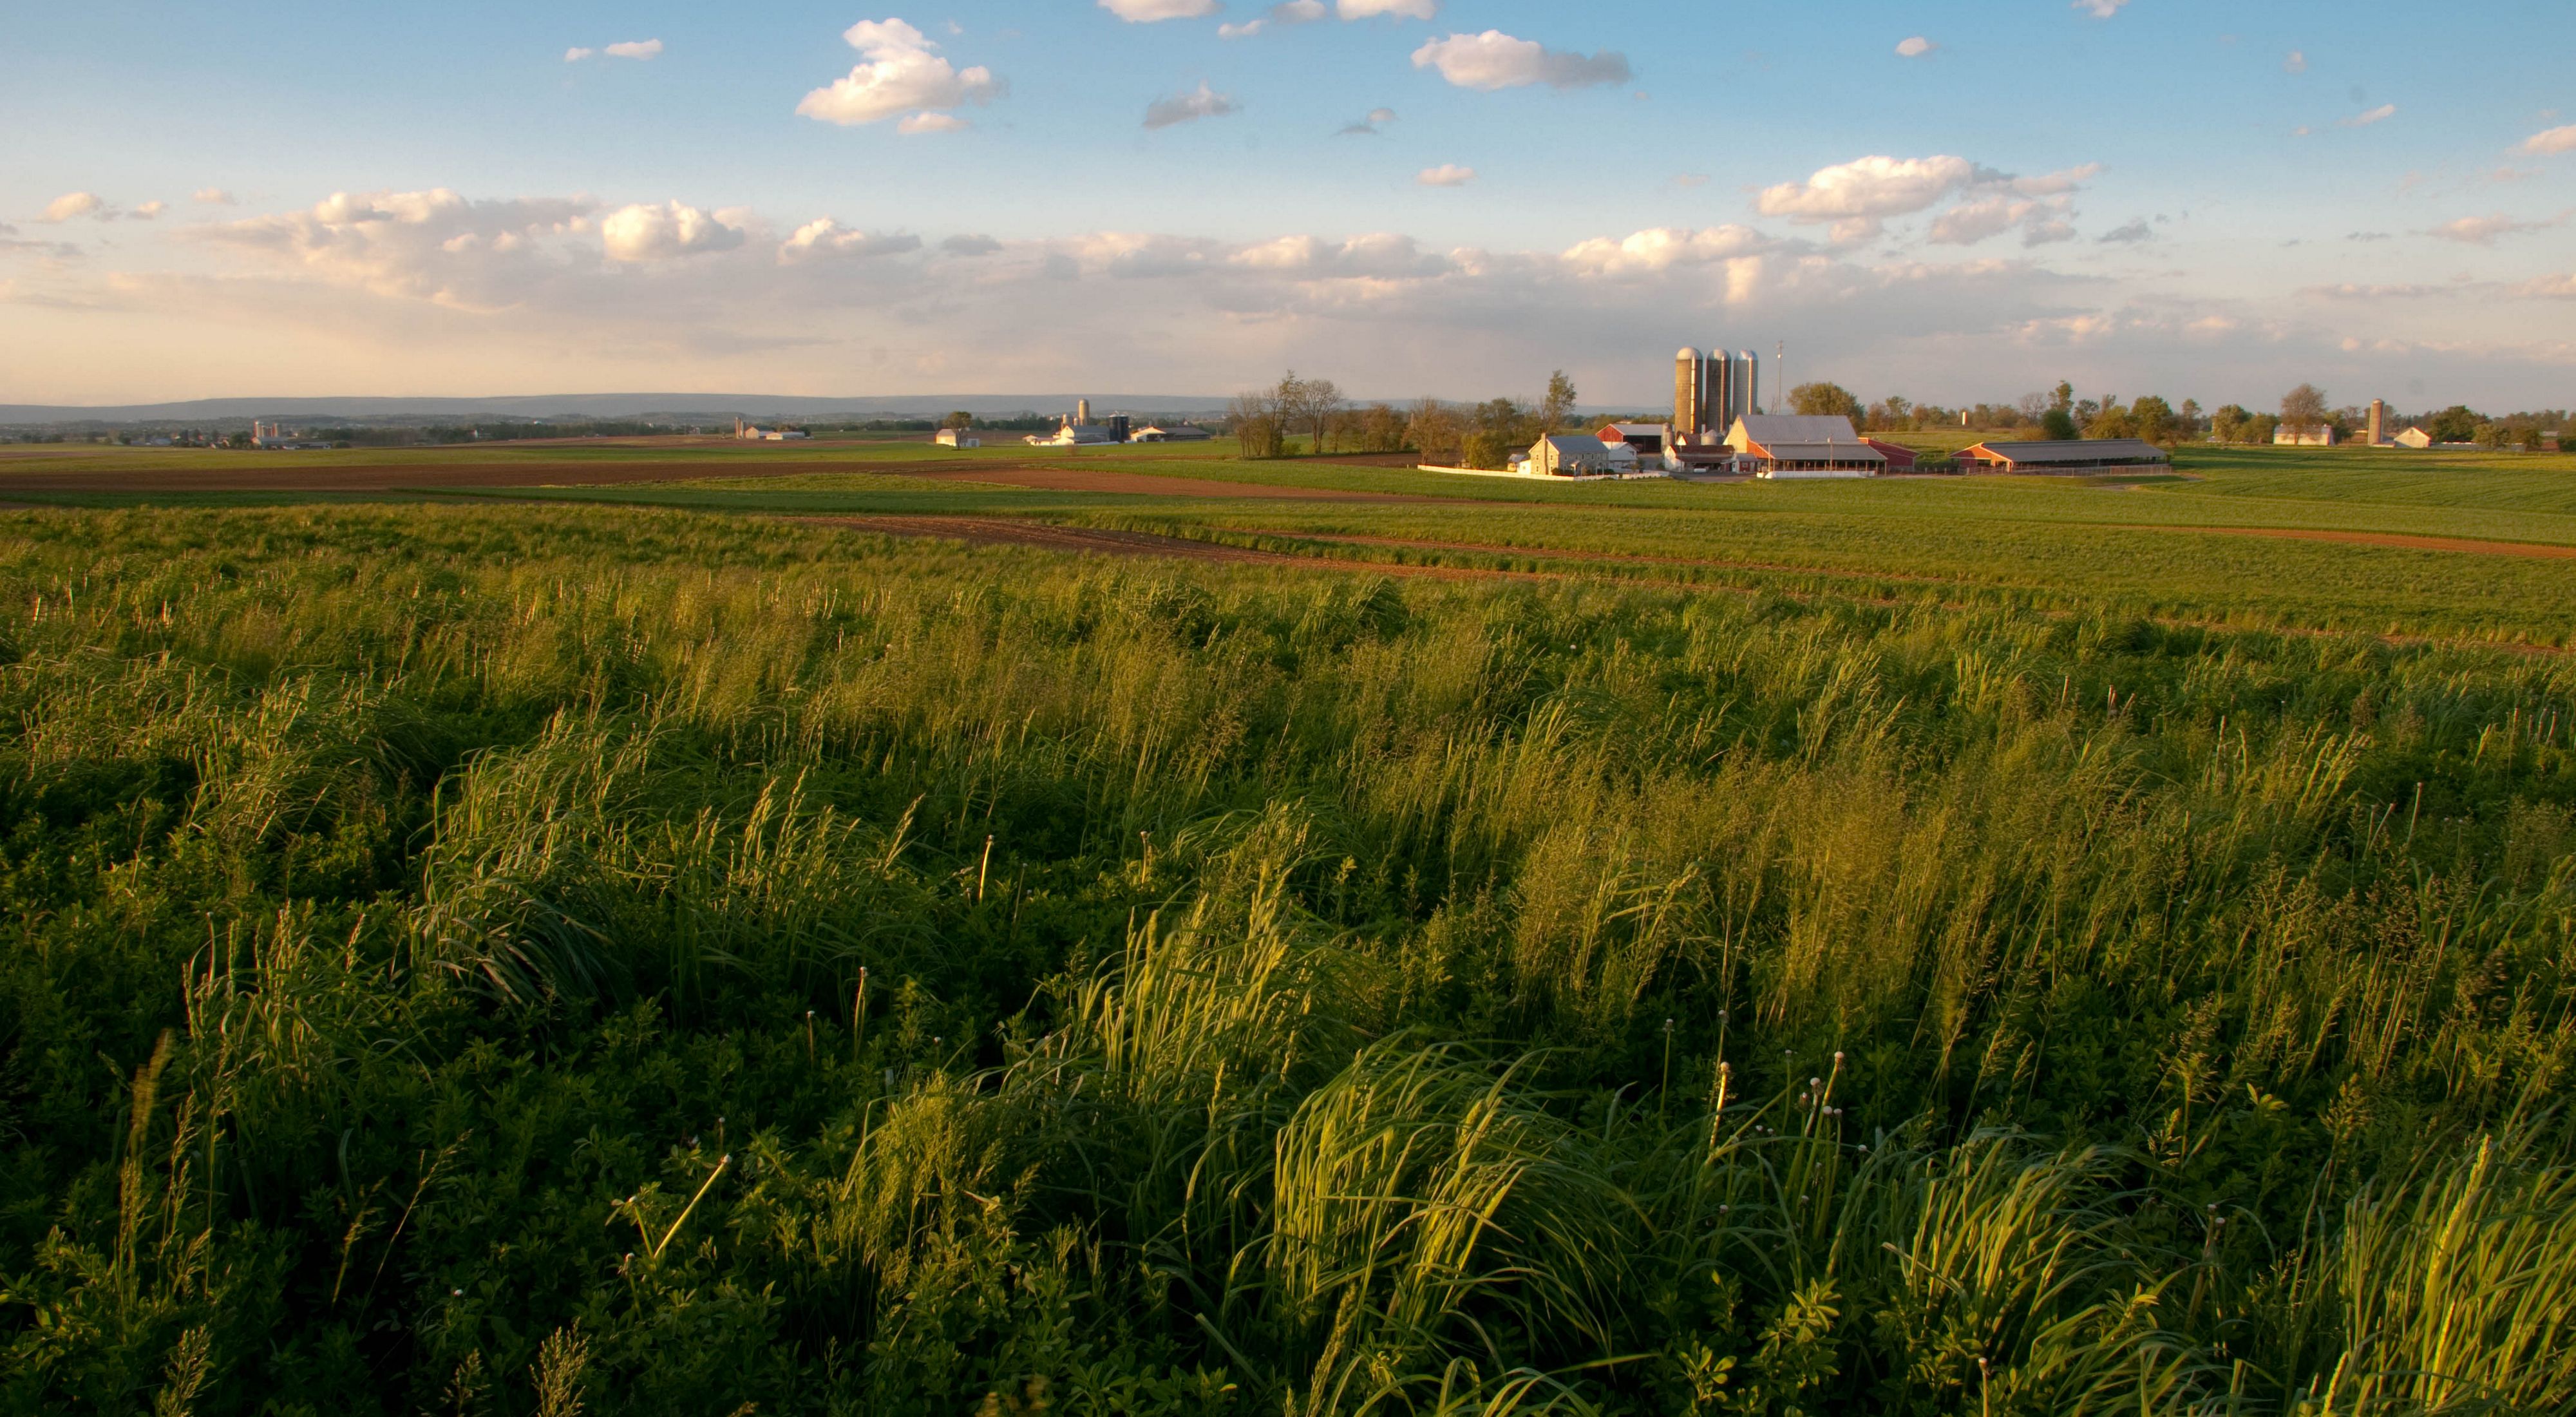 Tall grasses grow in the foreground at the edge of cultivated fields. Farm buildings and tall silos rise in the background.